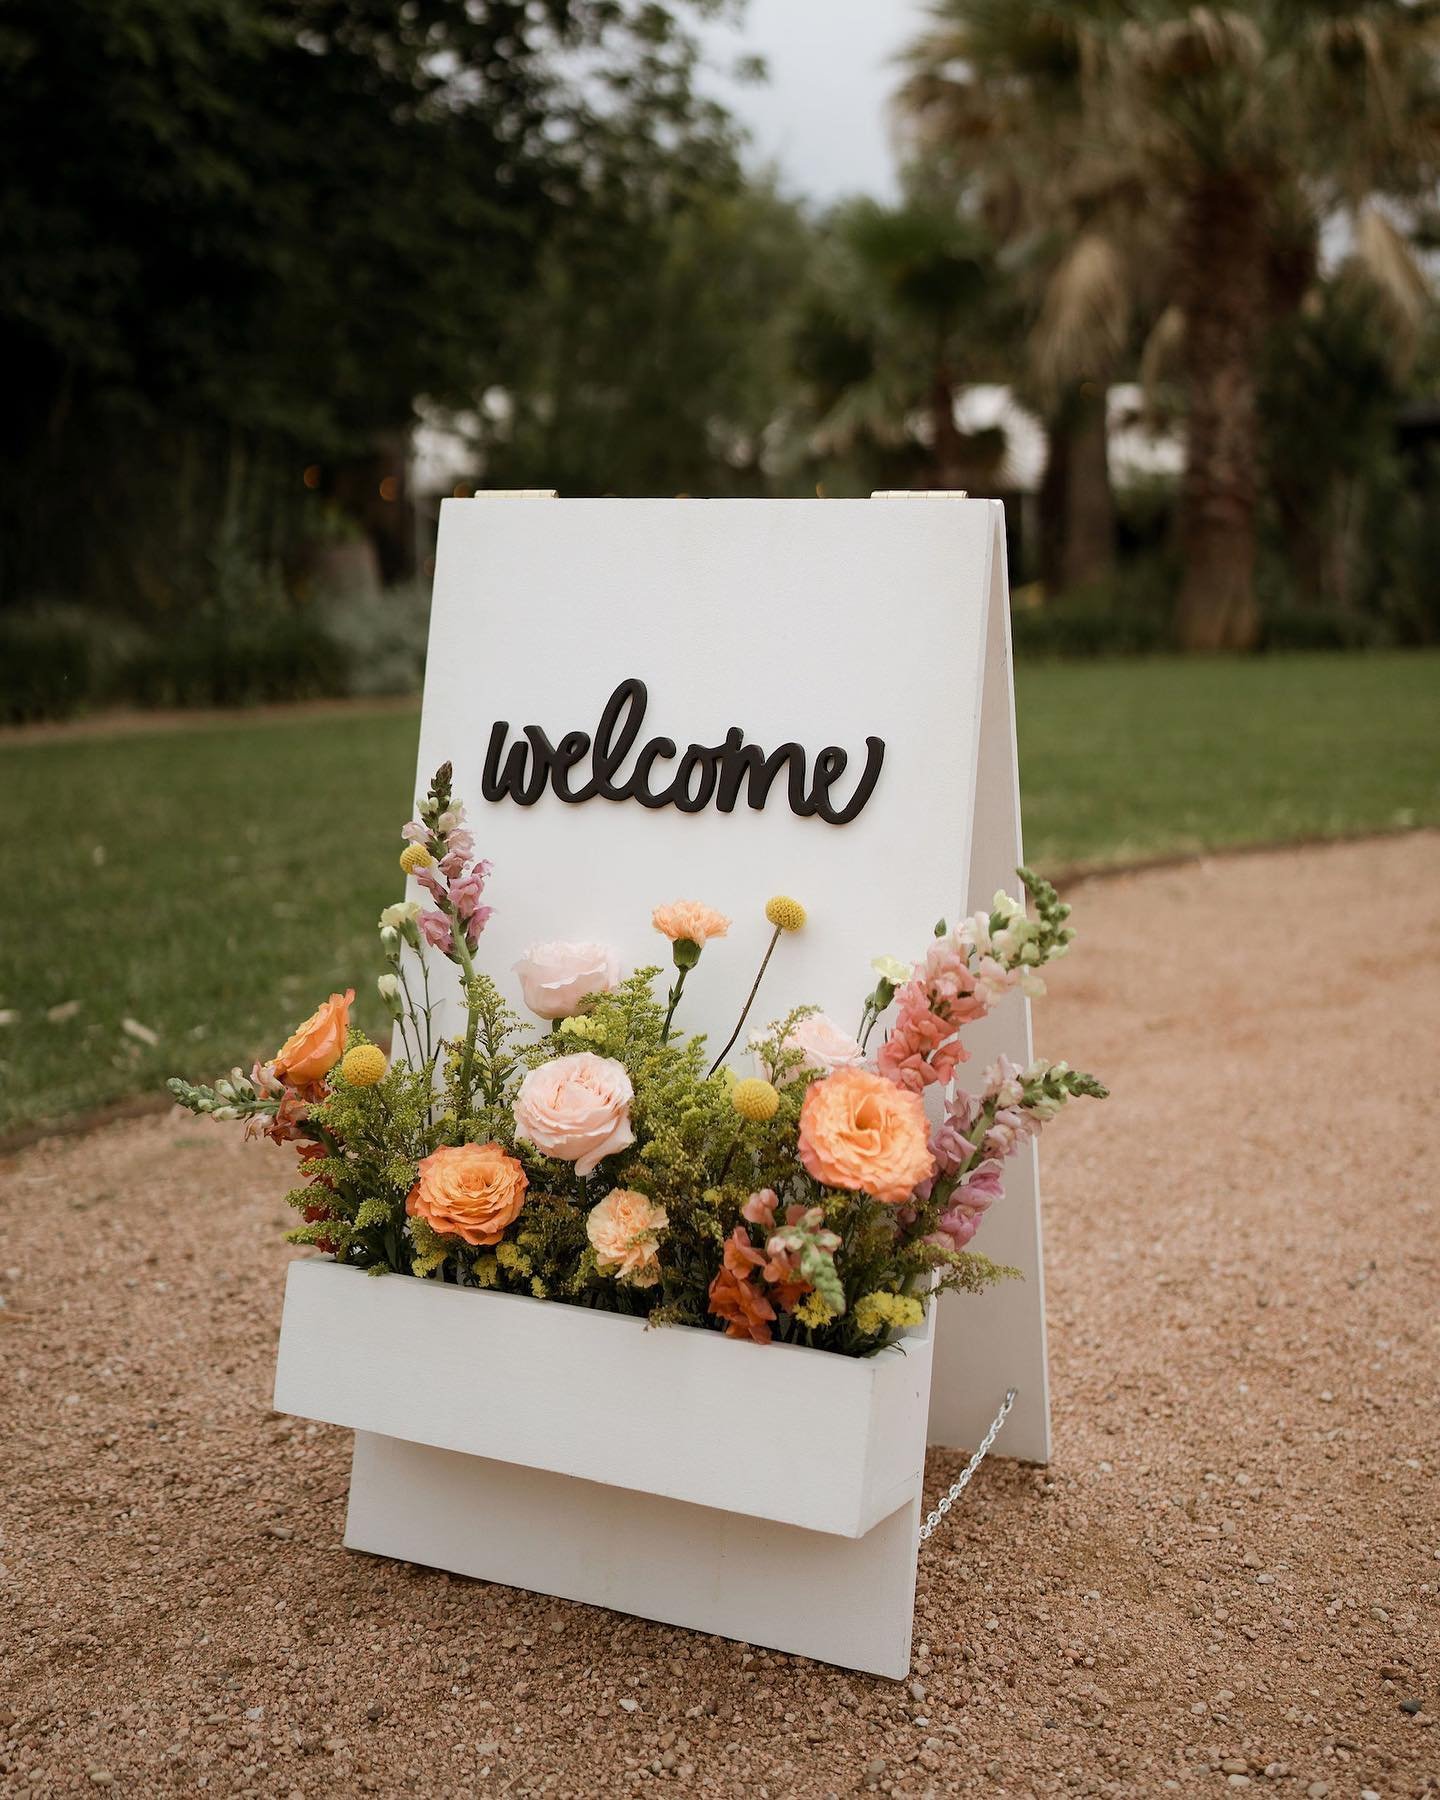 Kicking off the week with our adorable flower box welcome sign ✨

This box is so versatile- we love to see how each and every couple&rsquo;s vibe creates something totally unique 💓

📸: @mayfieldsphotography 

🌸: us!
&bull;
&bull;
&bull;
&bull;
#we